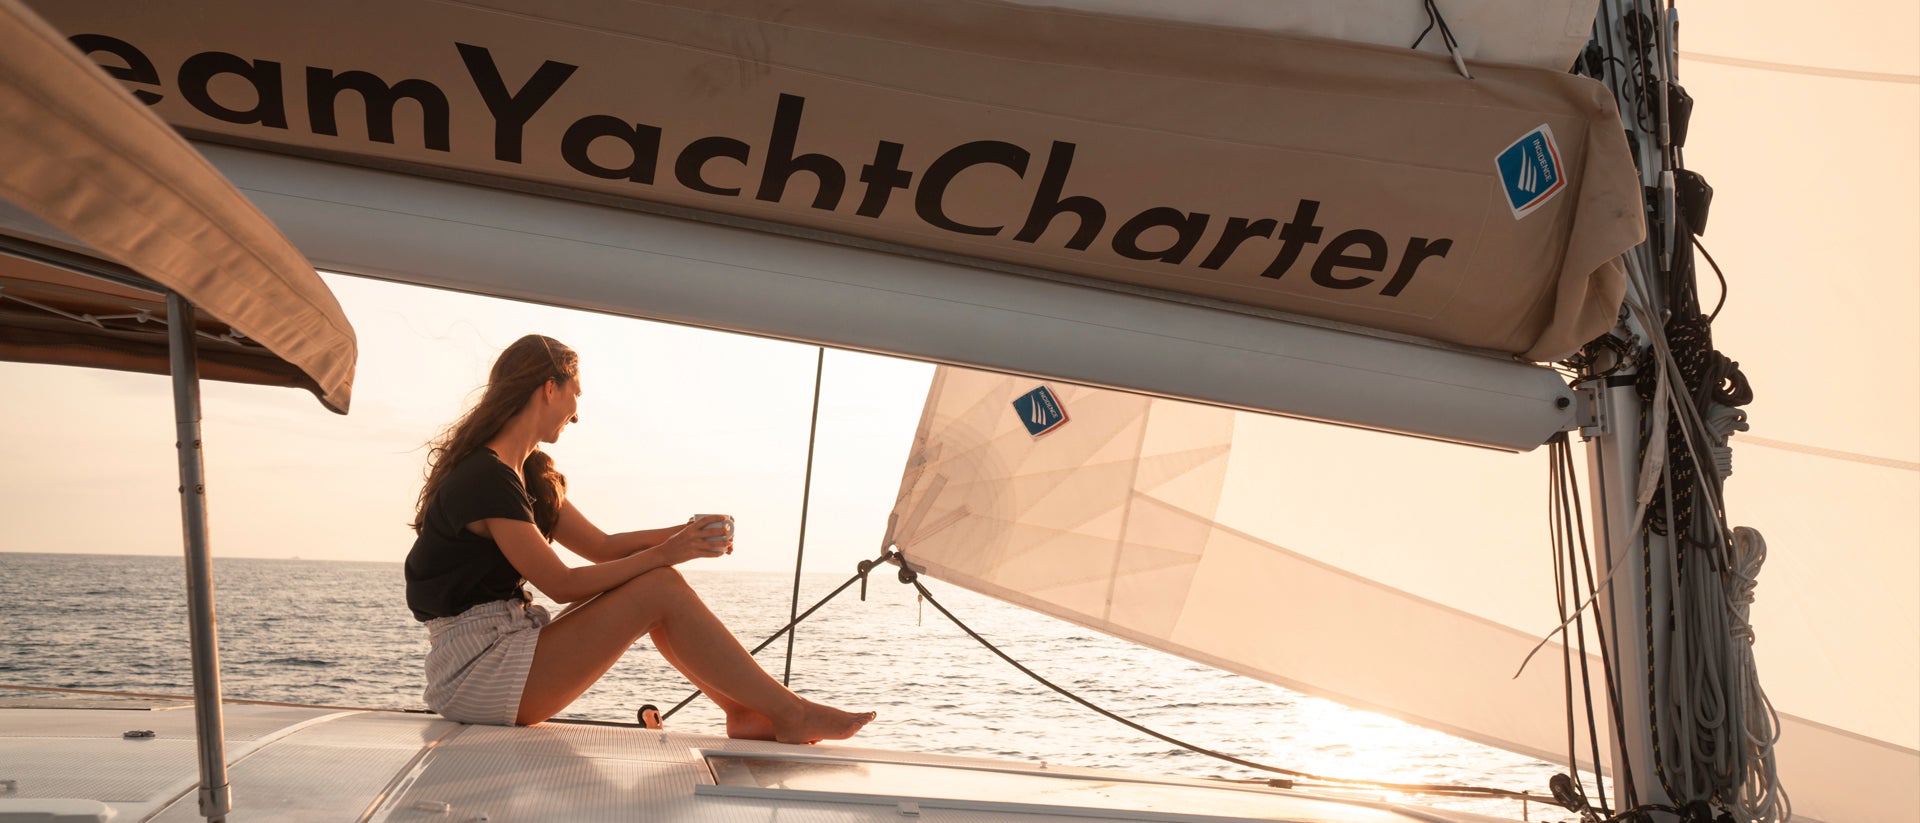 Brittany happy girl yacht charter sunset